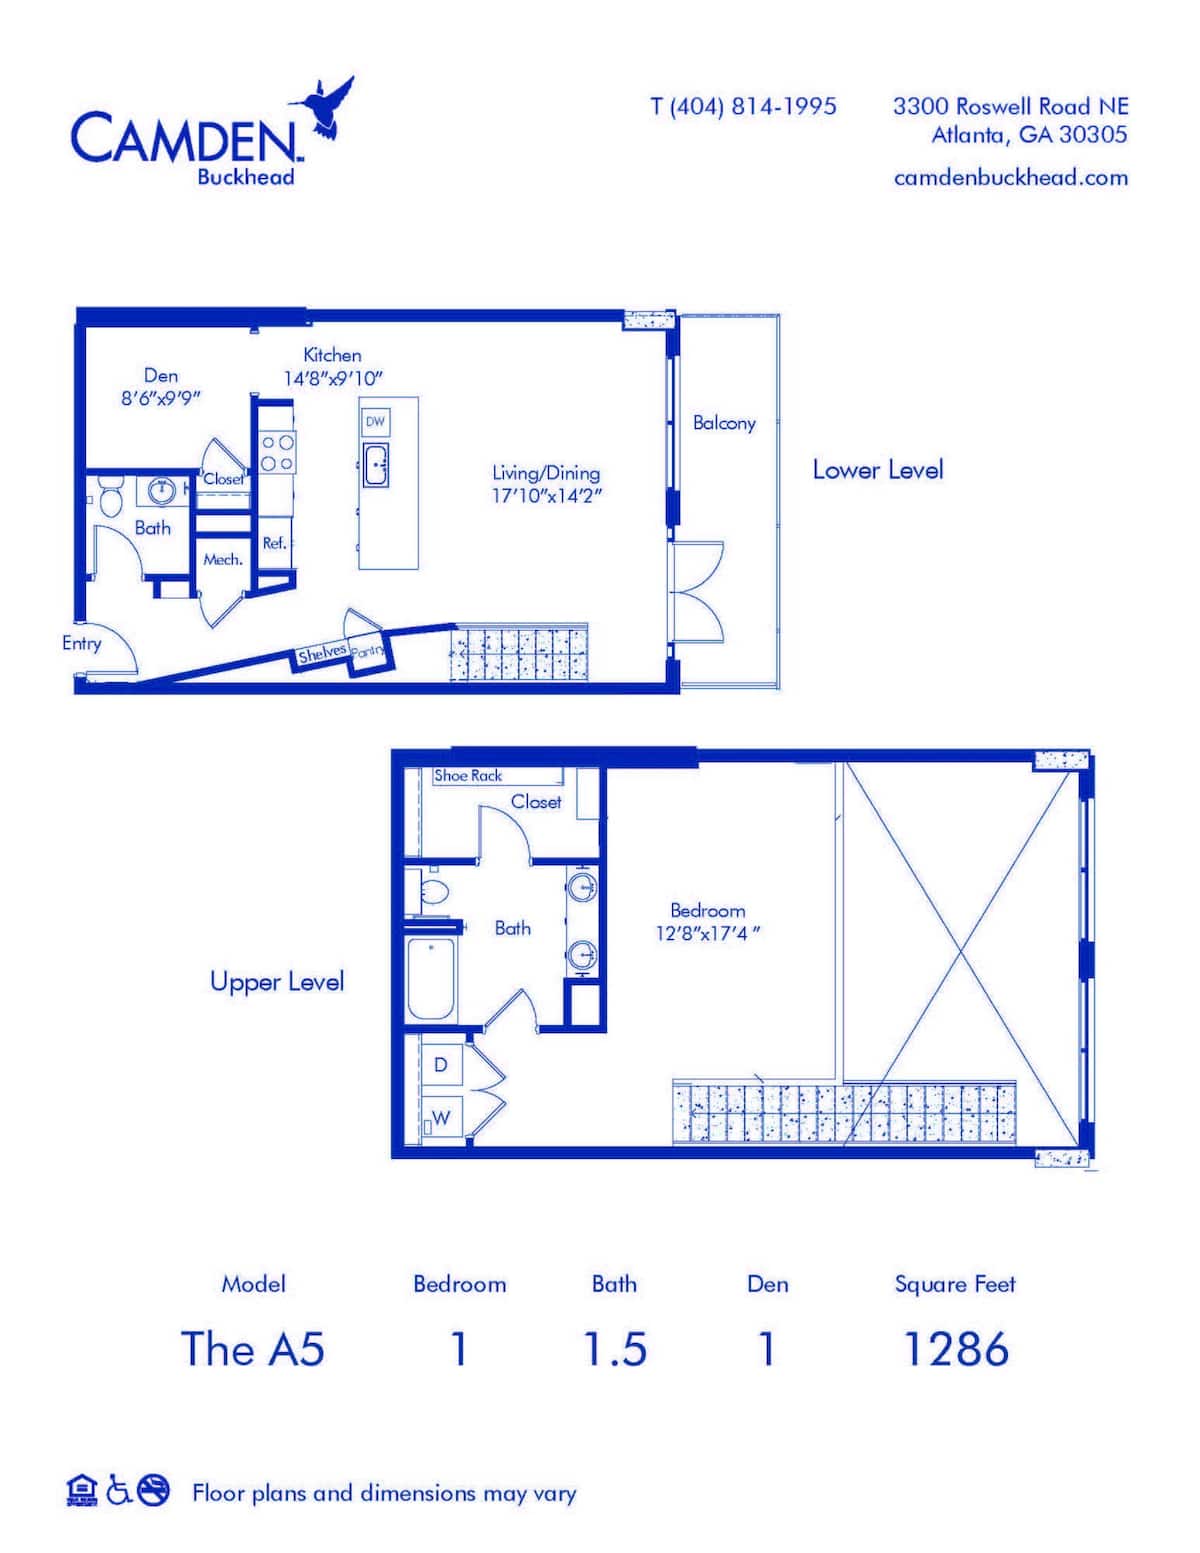 Floorplan diagram for The A5, showing 1 bedroom